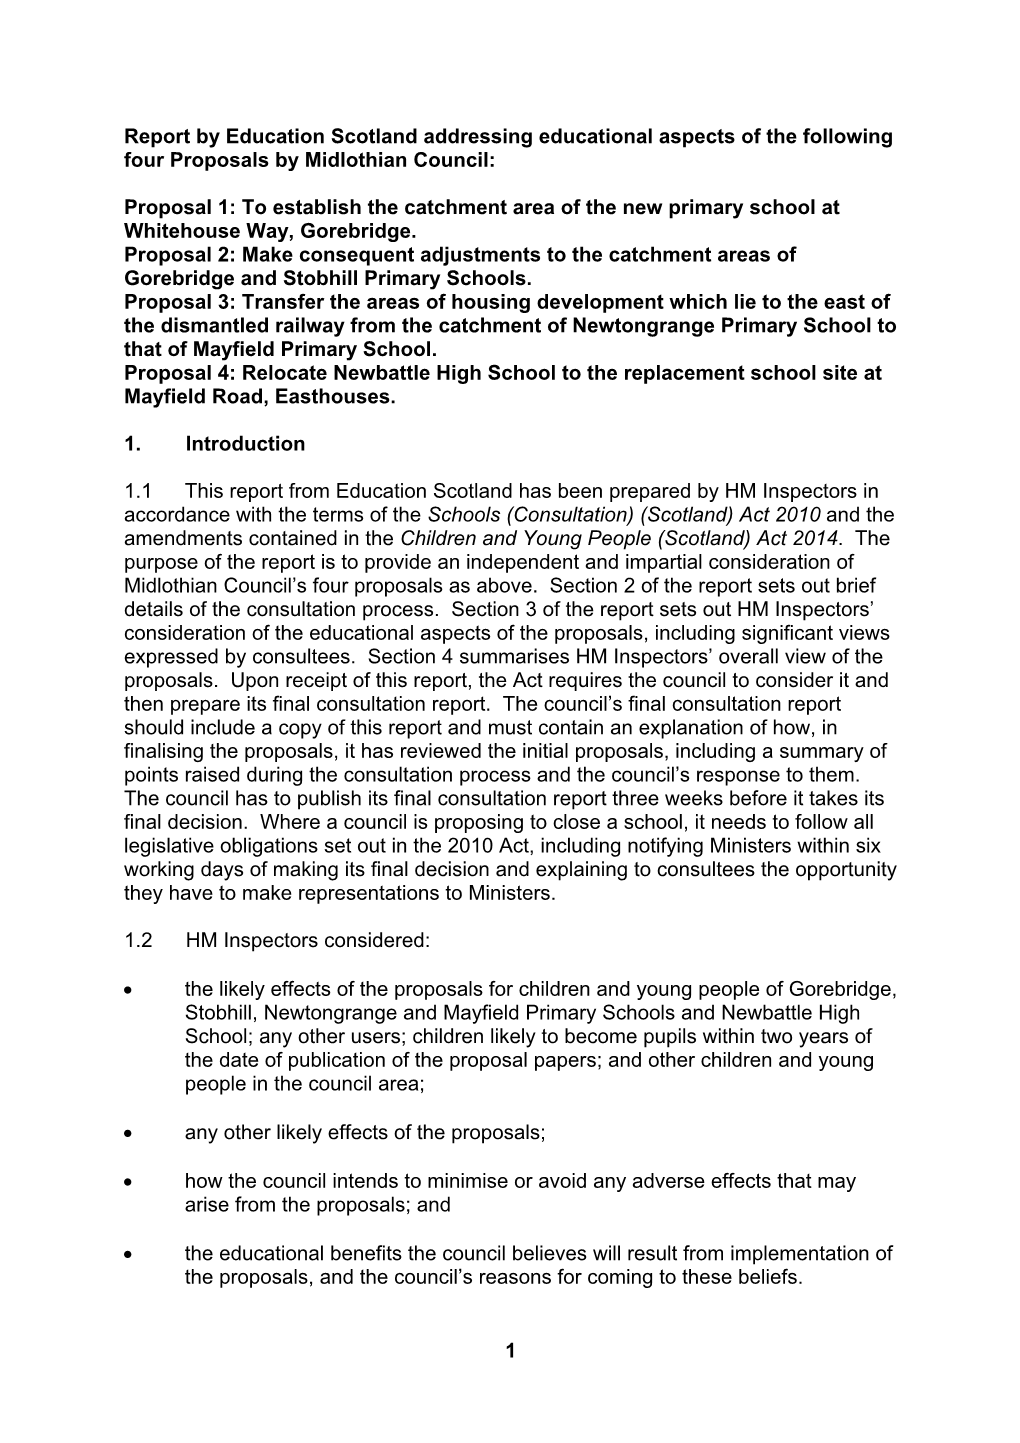 Proposal 1: to Establish the Catchment Area of the New Primary School at Whitehouse Way, Gorebridge